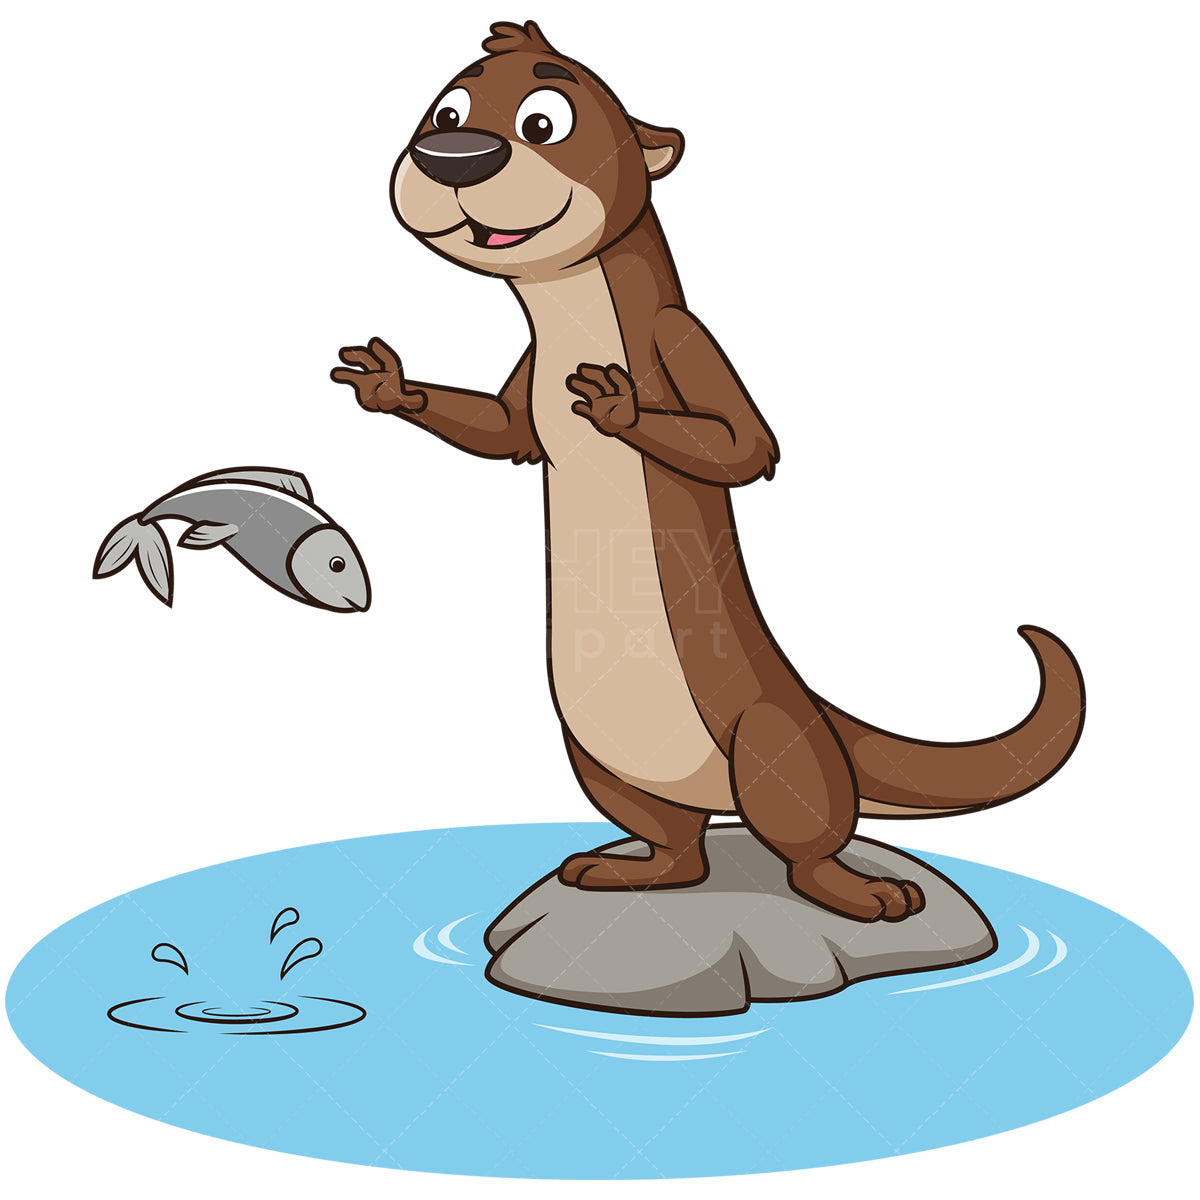 Royalty-free stock vector illustration of an otter catching fish.